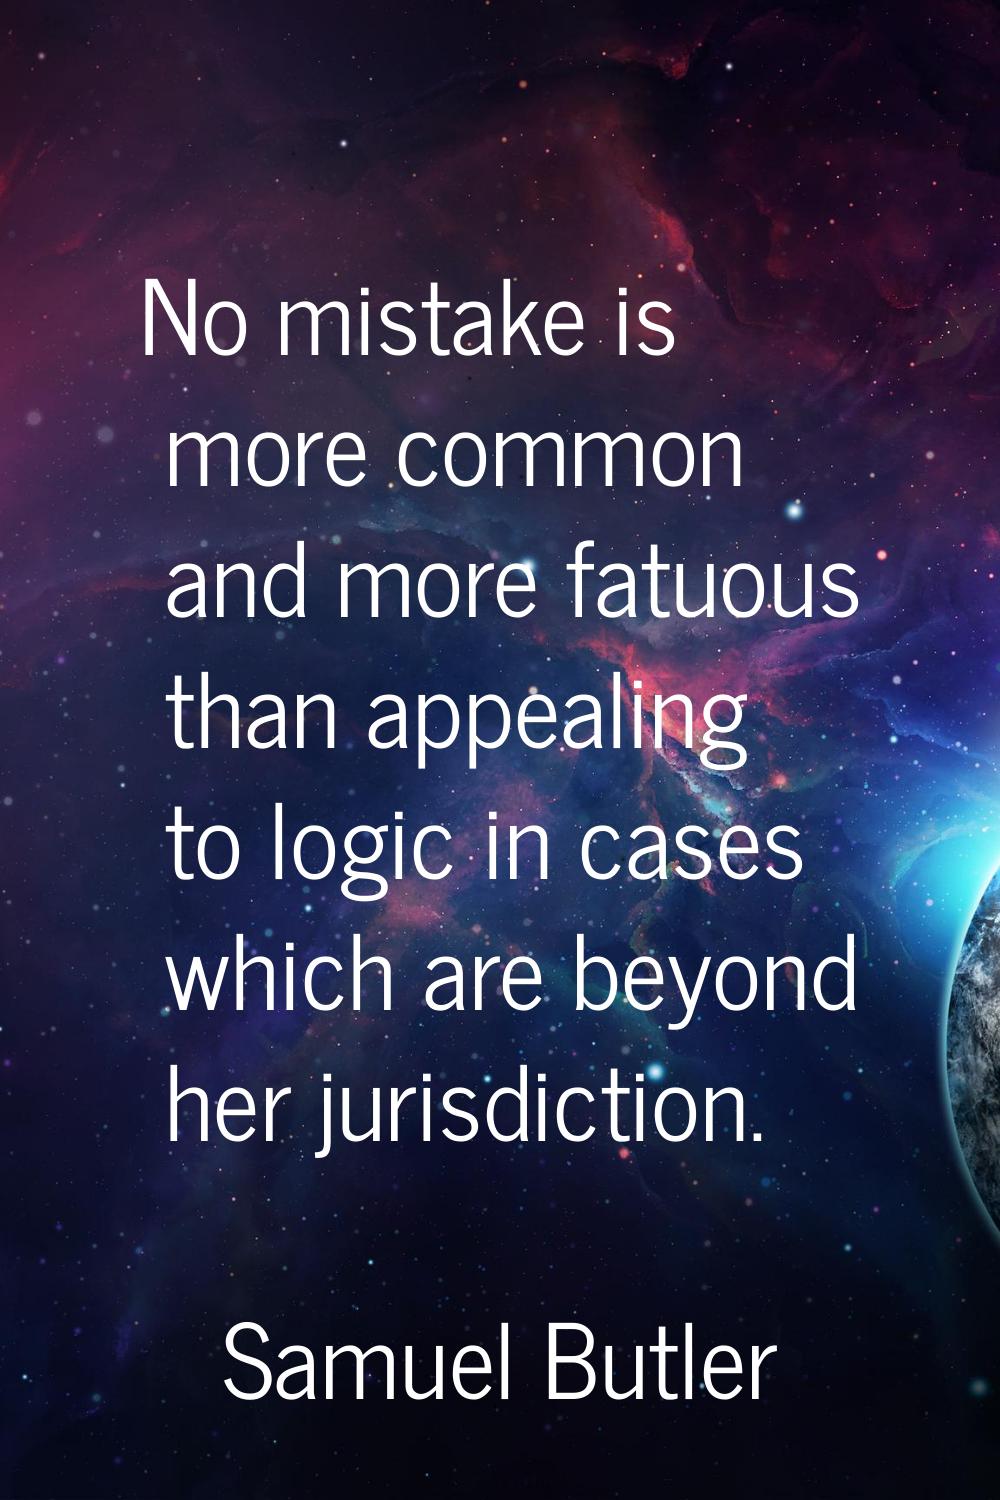 No mistake is more common and more fatuous than appealing to logic in cases which are beyond her ju